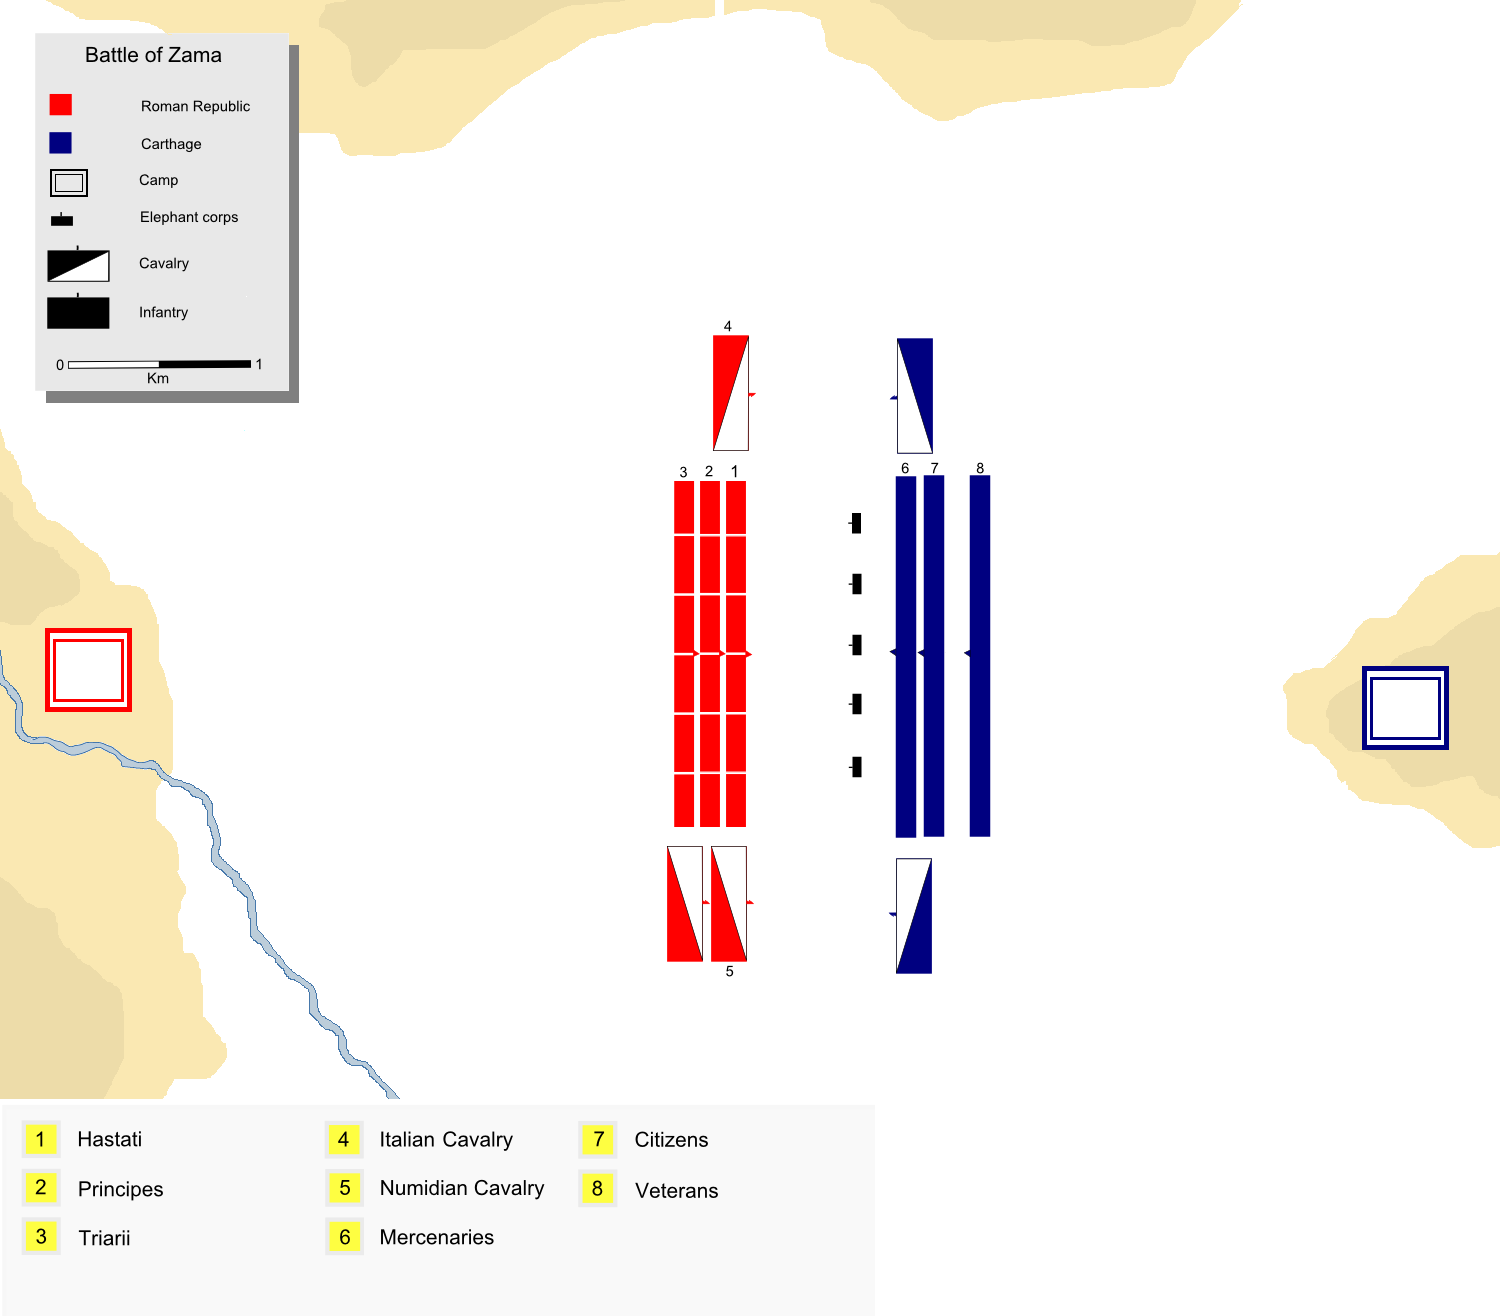 19 Oct, 202 BCE The Battle of Zama Initital Deployment.png